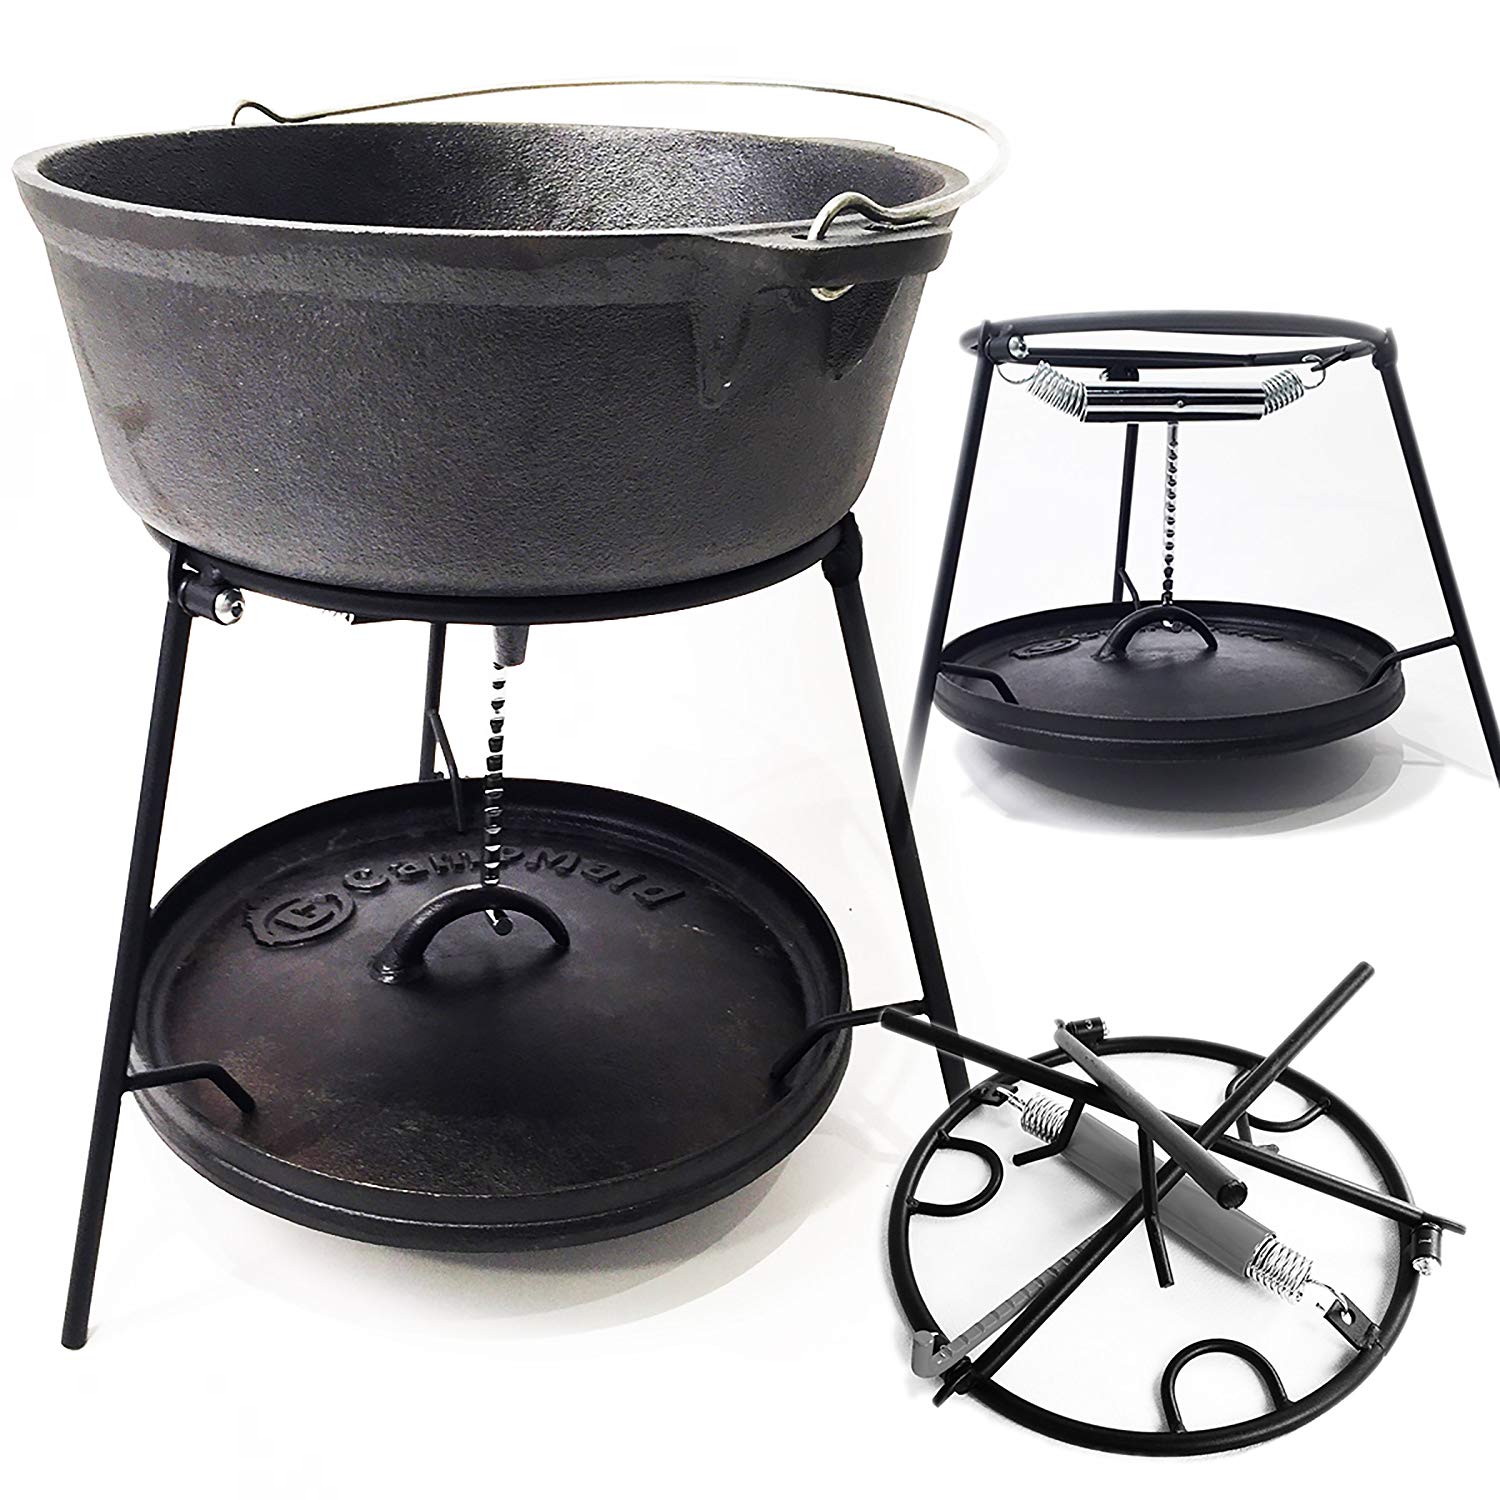 campmaid outdoor cooking set - dutch oven and tools set - charcoal